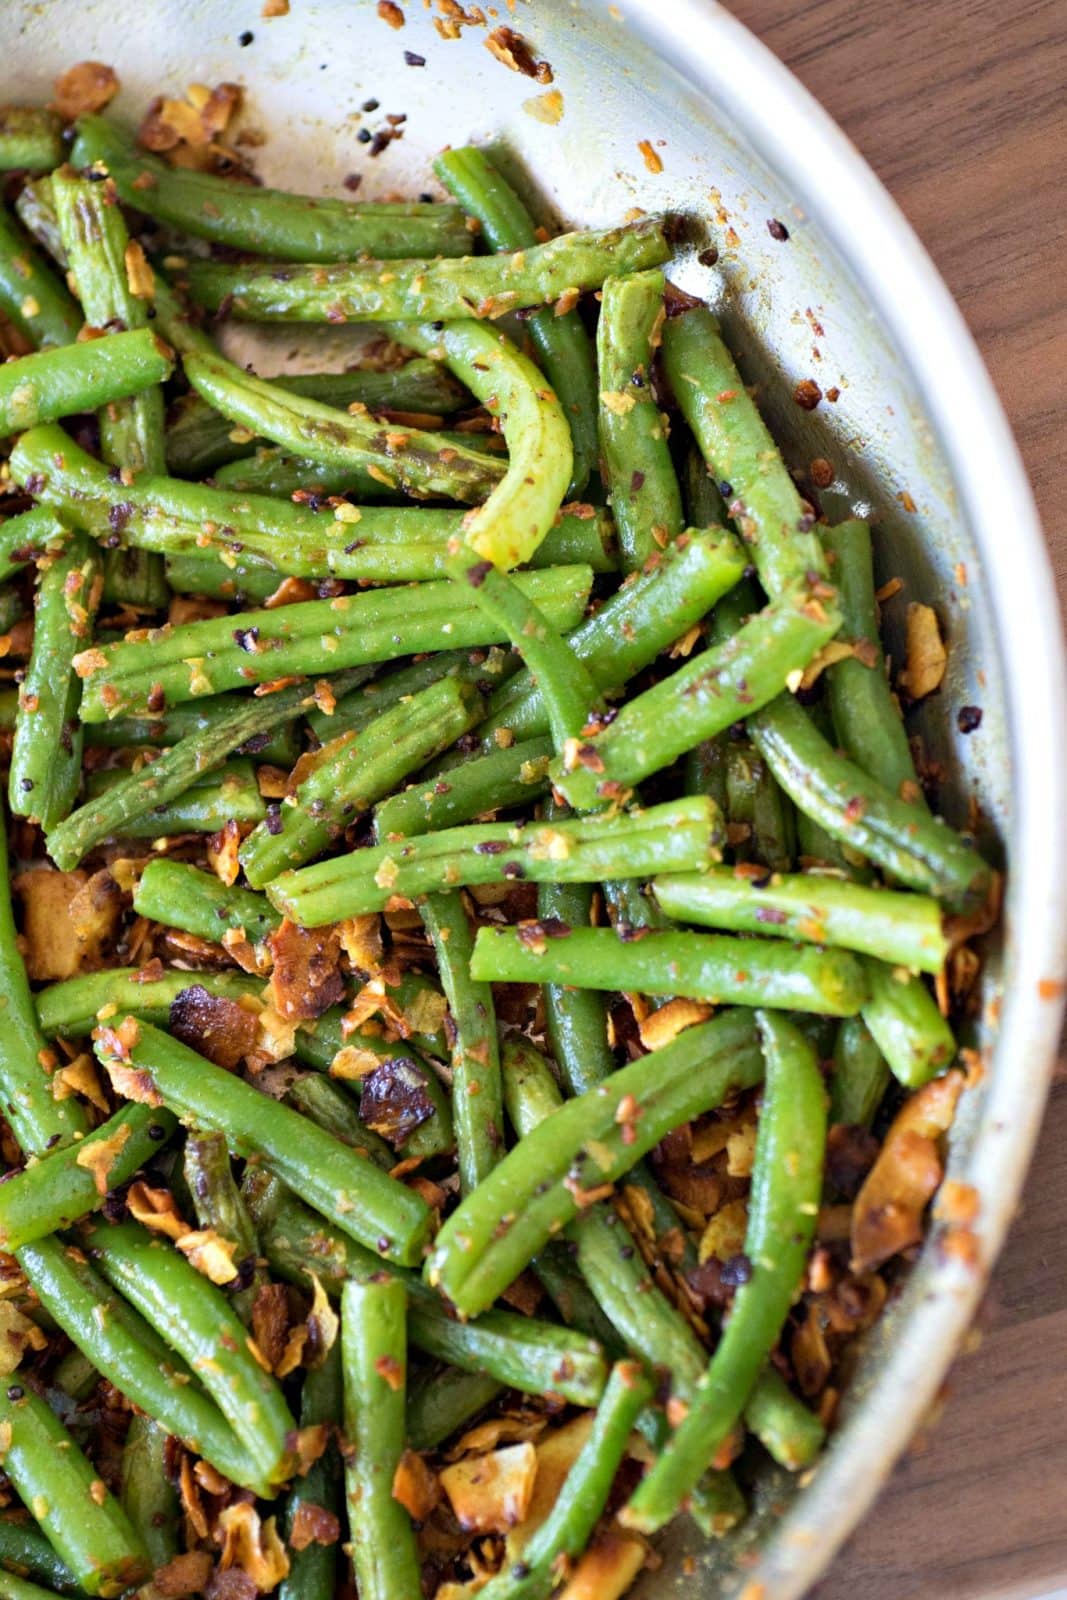 Sauteed green beans on a table.